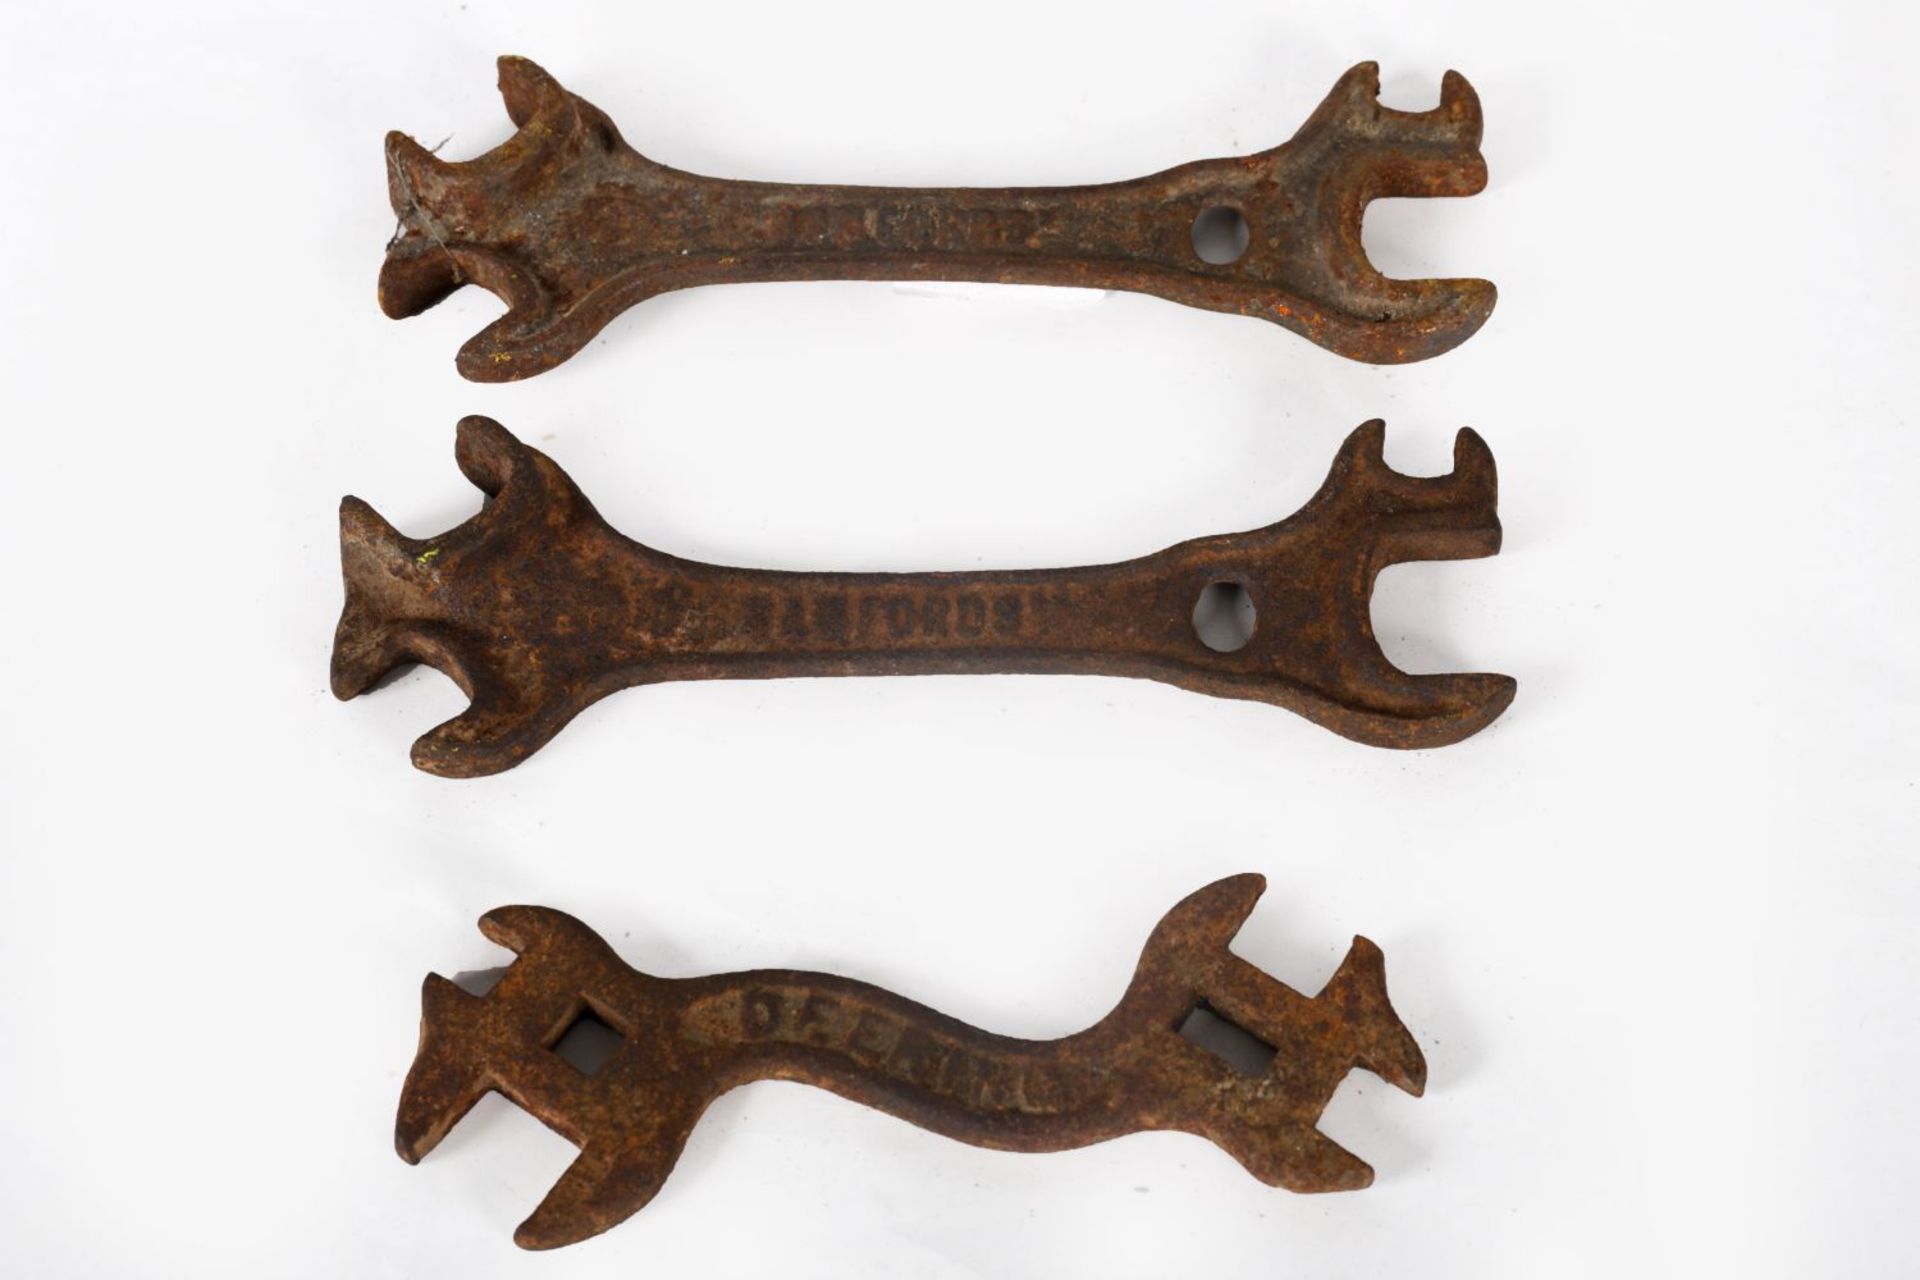 3 EARLY CAST IRON WRENCHES